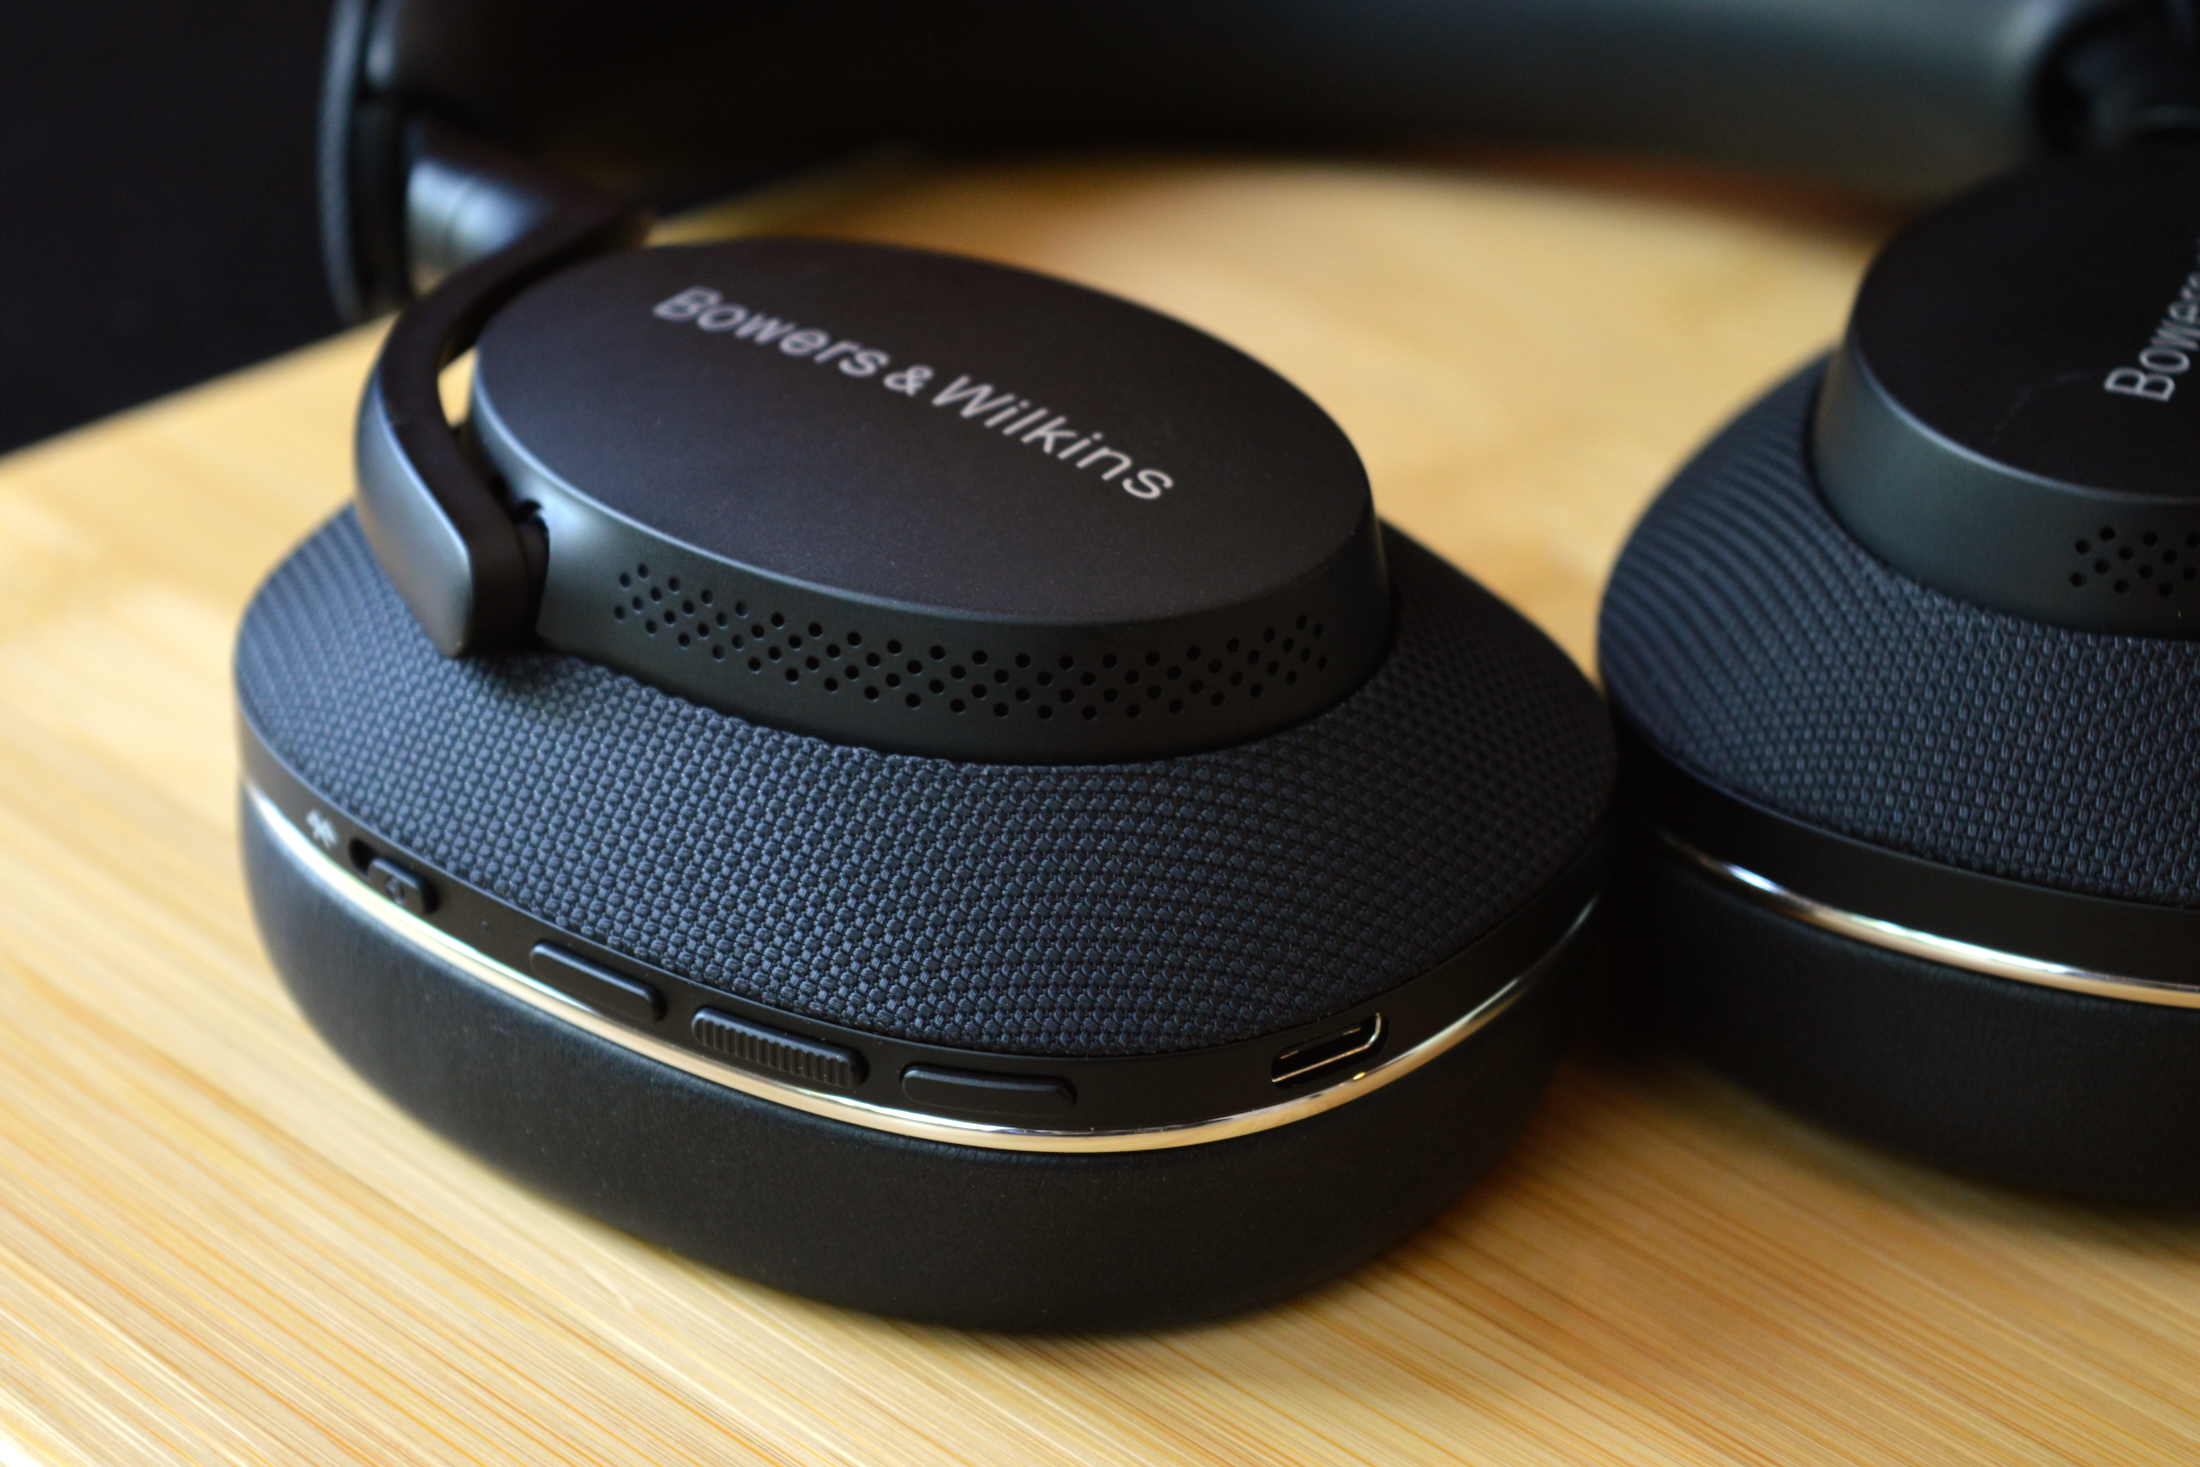 Bowers & Wilkins Px7 S2 review: Style, sound, and comfort